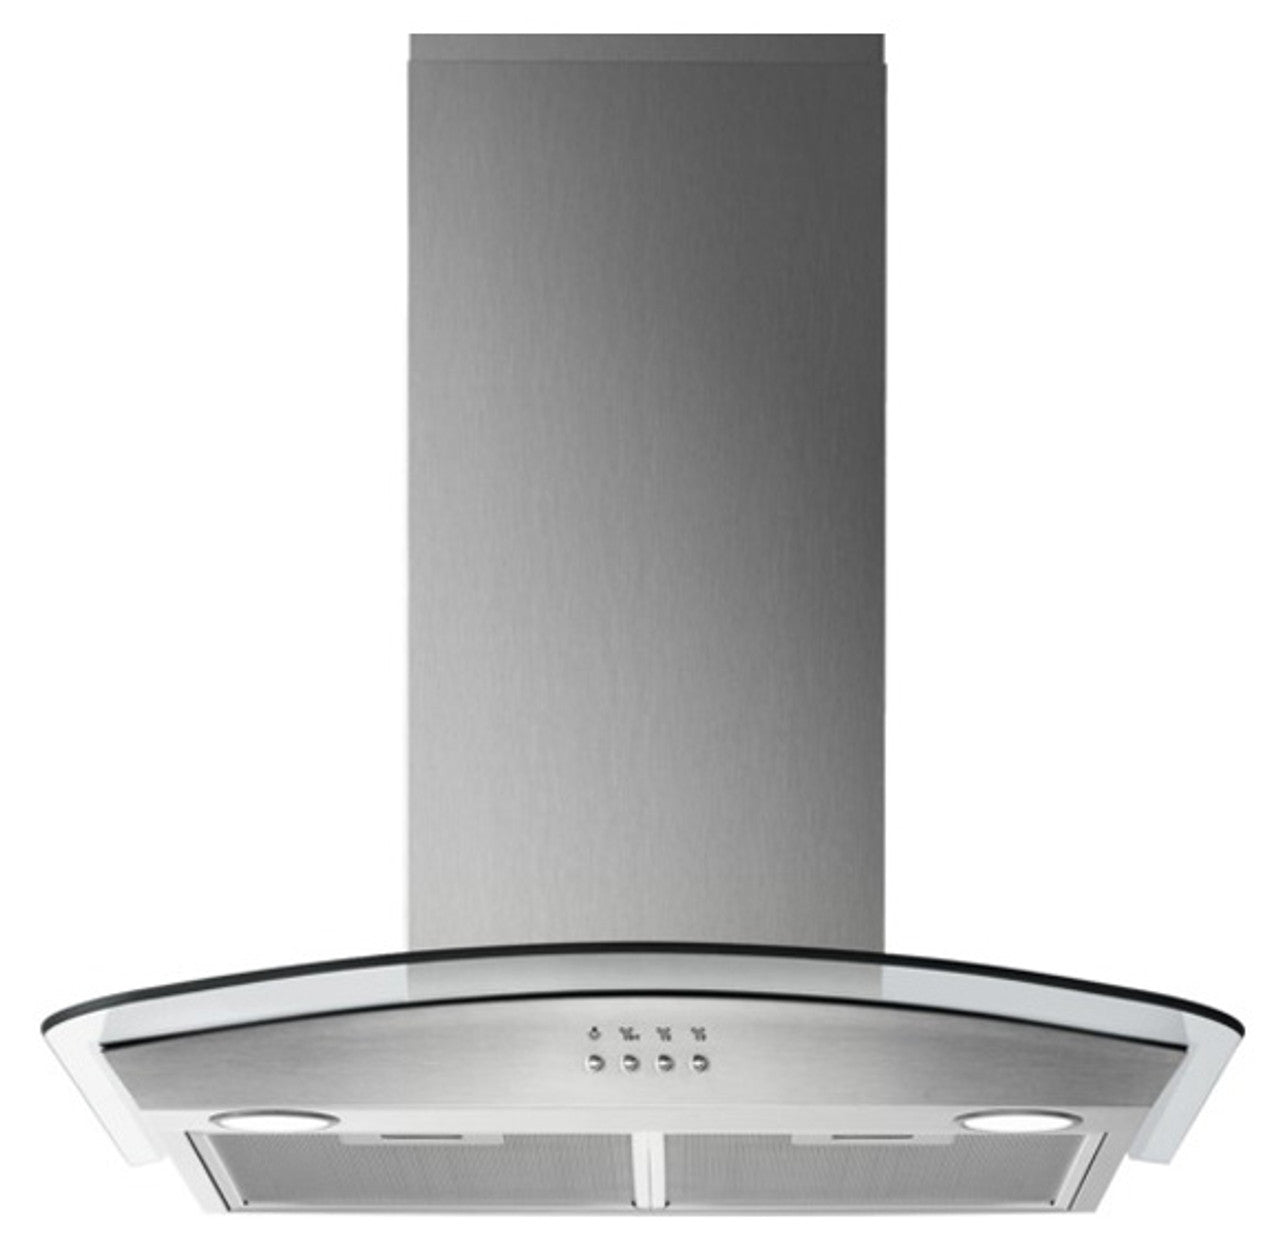 Electrolux LFL316A Cooker Hood 60cm Chimney Curved Glass Stainless Steel